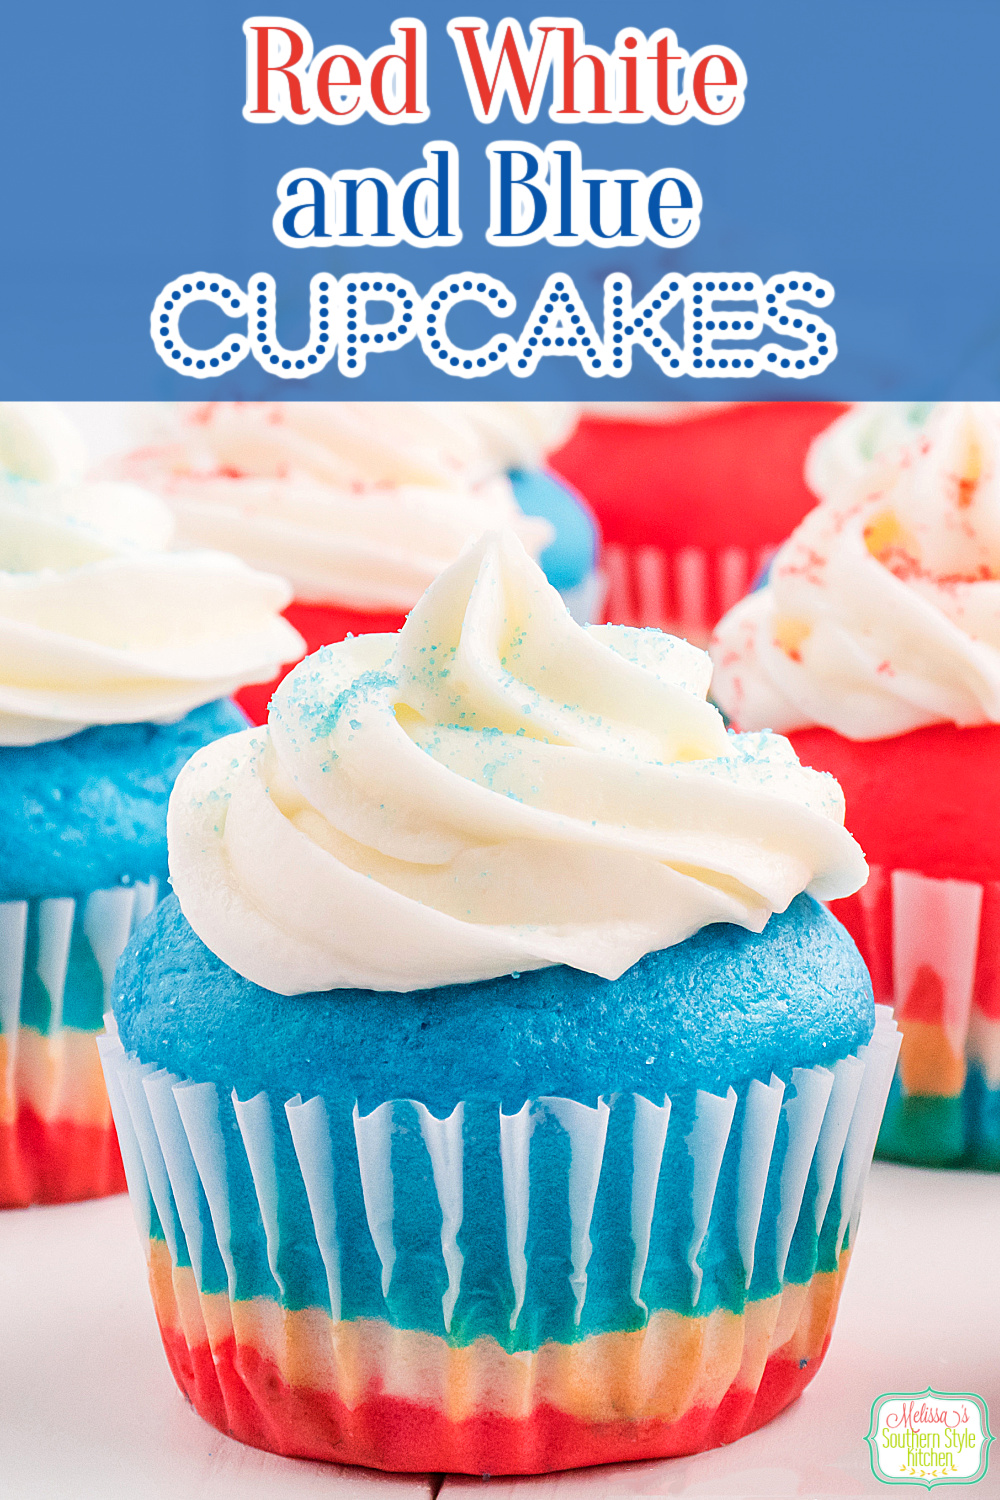 These festive Red White and Blue Cupcakes are a fun Patriotic dessert for July 4th or any special American holiday. #redwhiteandblue #cupcakes #cupcakerecipes #july4th #cakerecipes #patrioticcupcakes